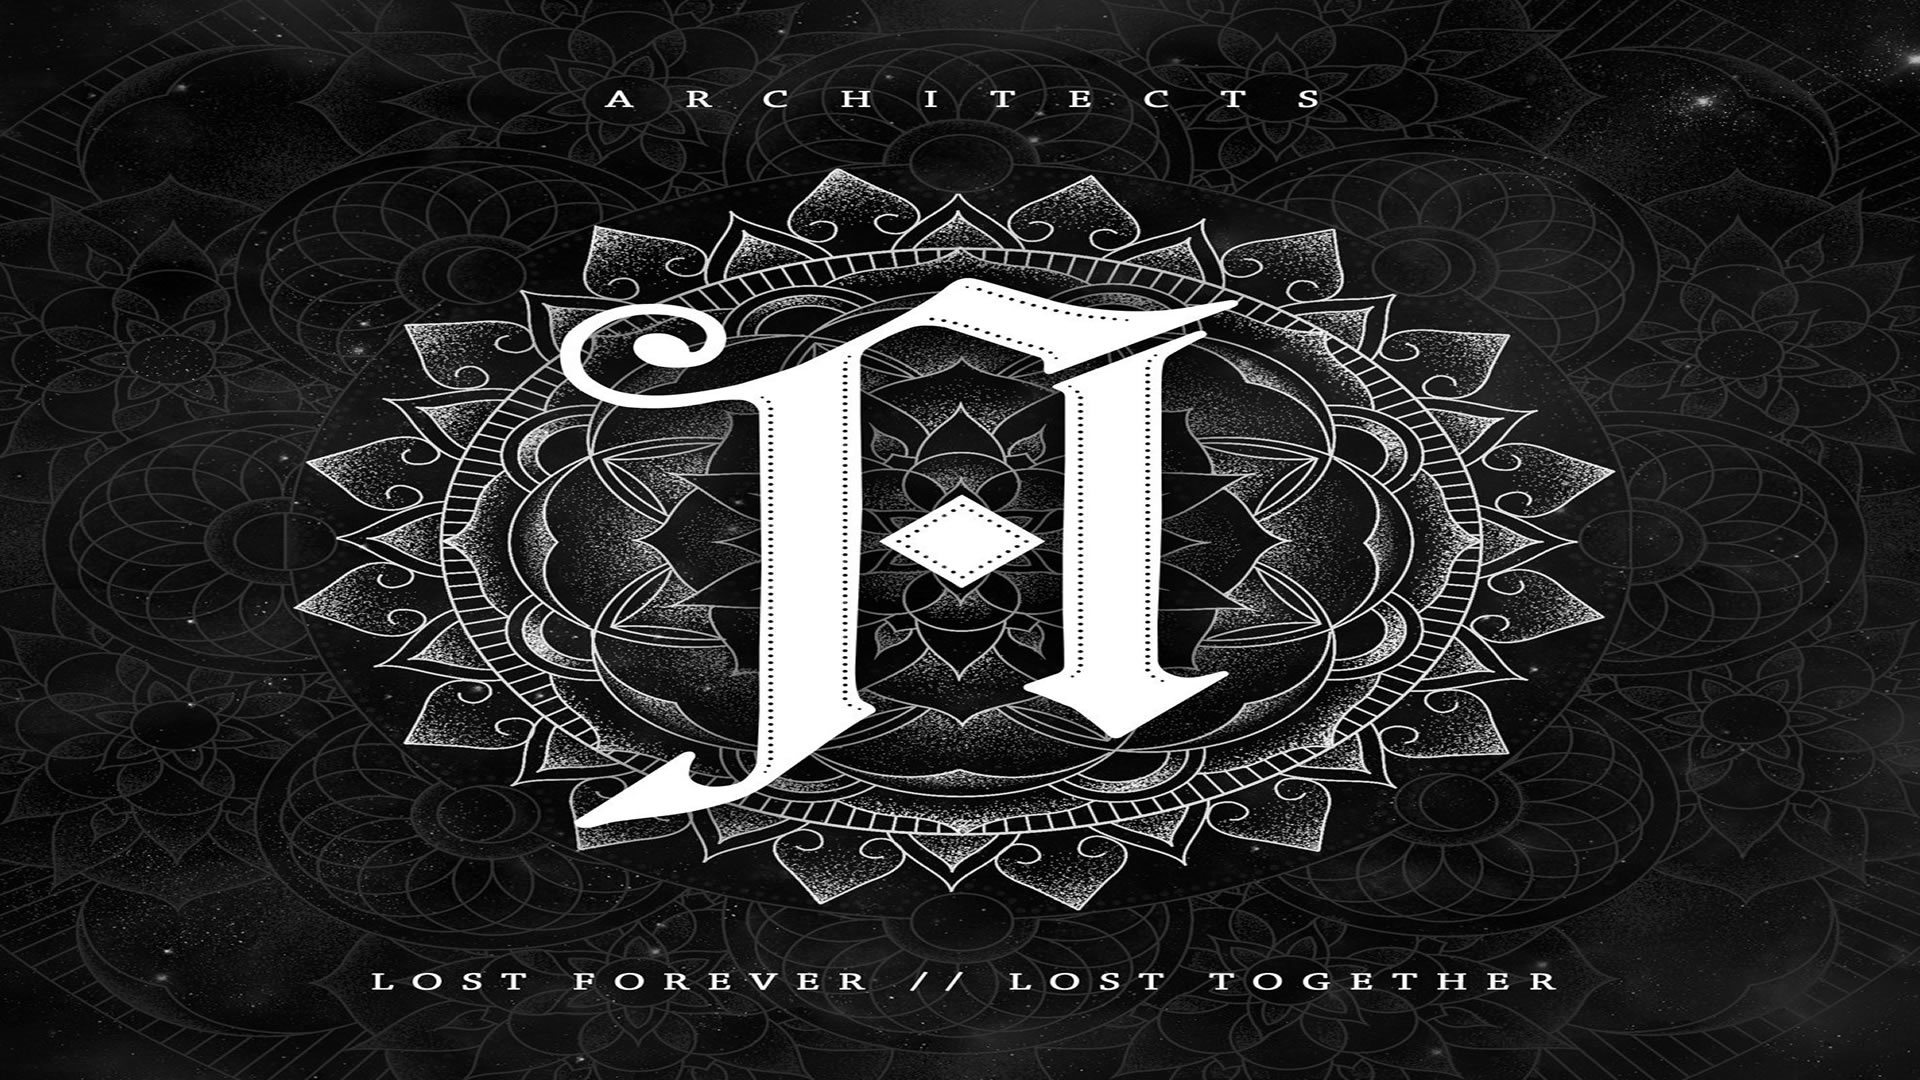 Architects - Lost forever//Lost together